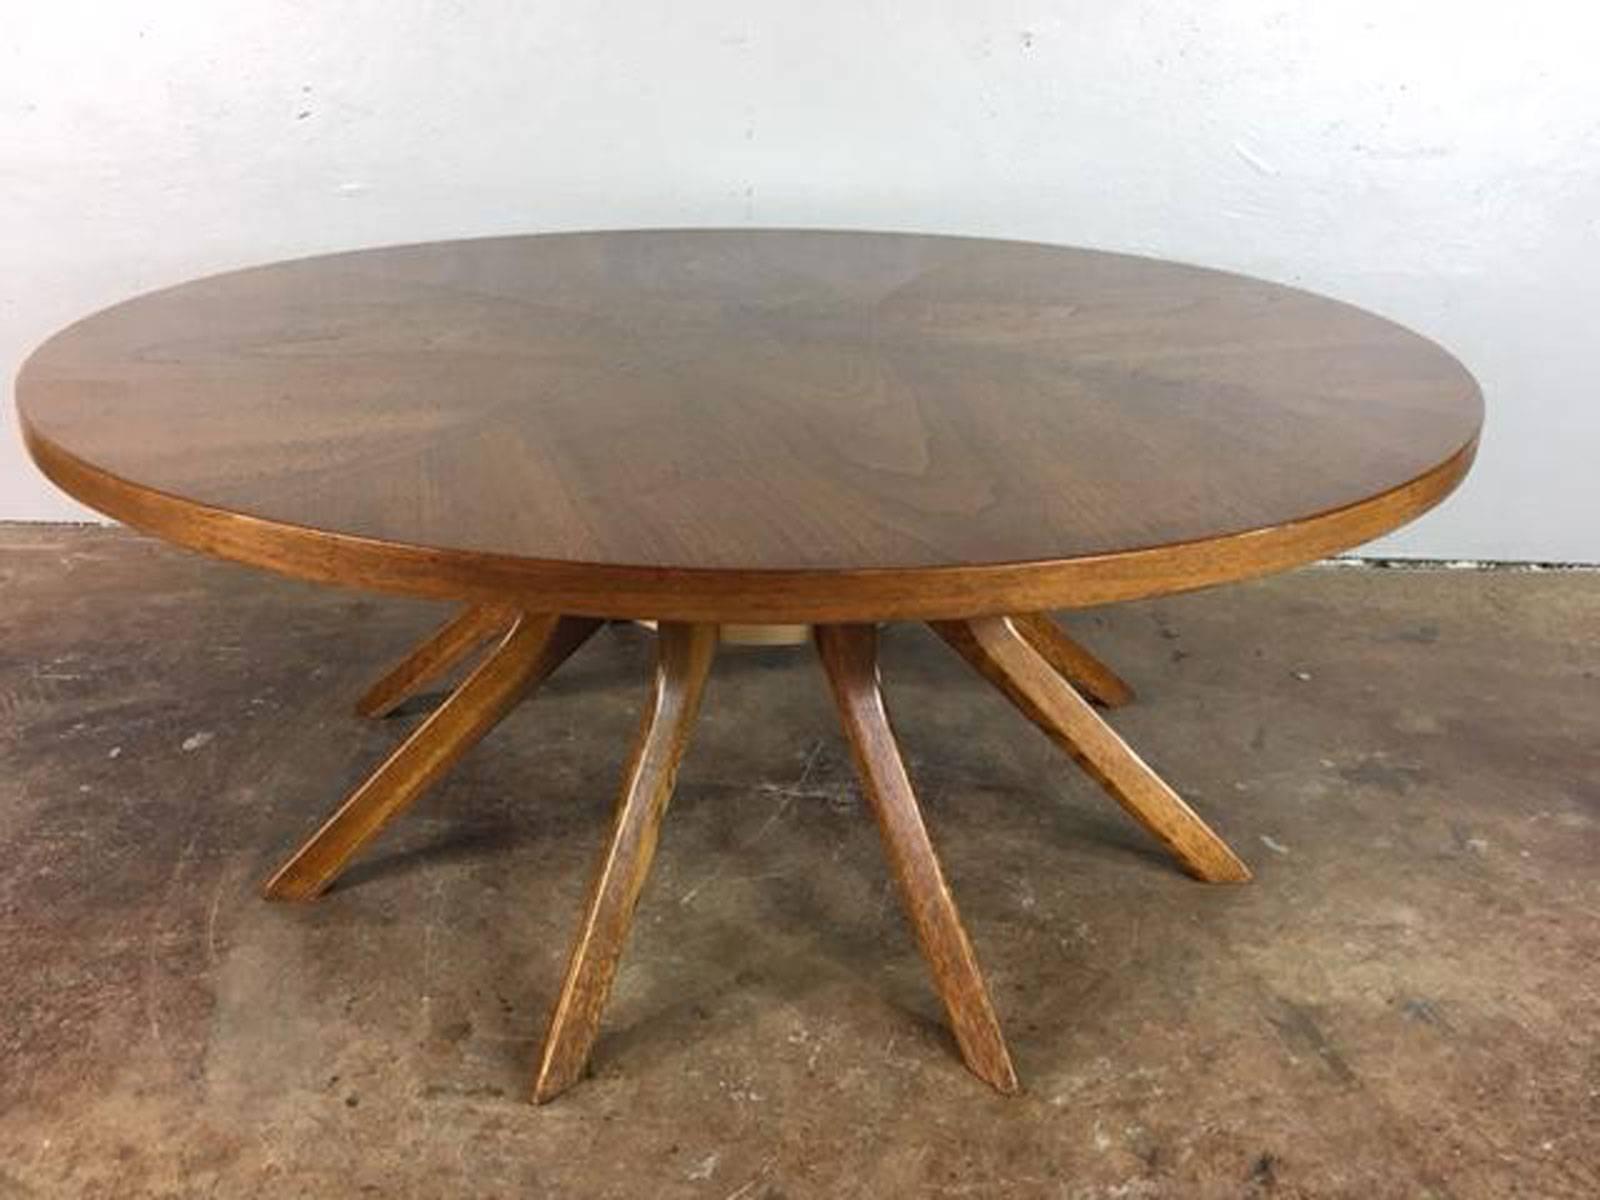 Broyhill Brasilia Cathedral coffee table, circa 1960s. Inlay walnut top and sculptural splayed legs. Overall very good condition. Sharp. Sturdy.